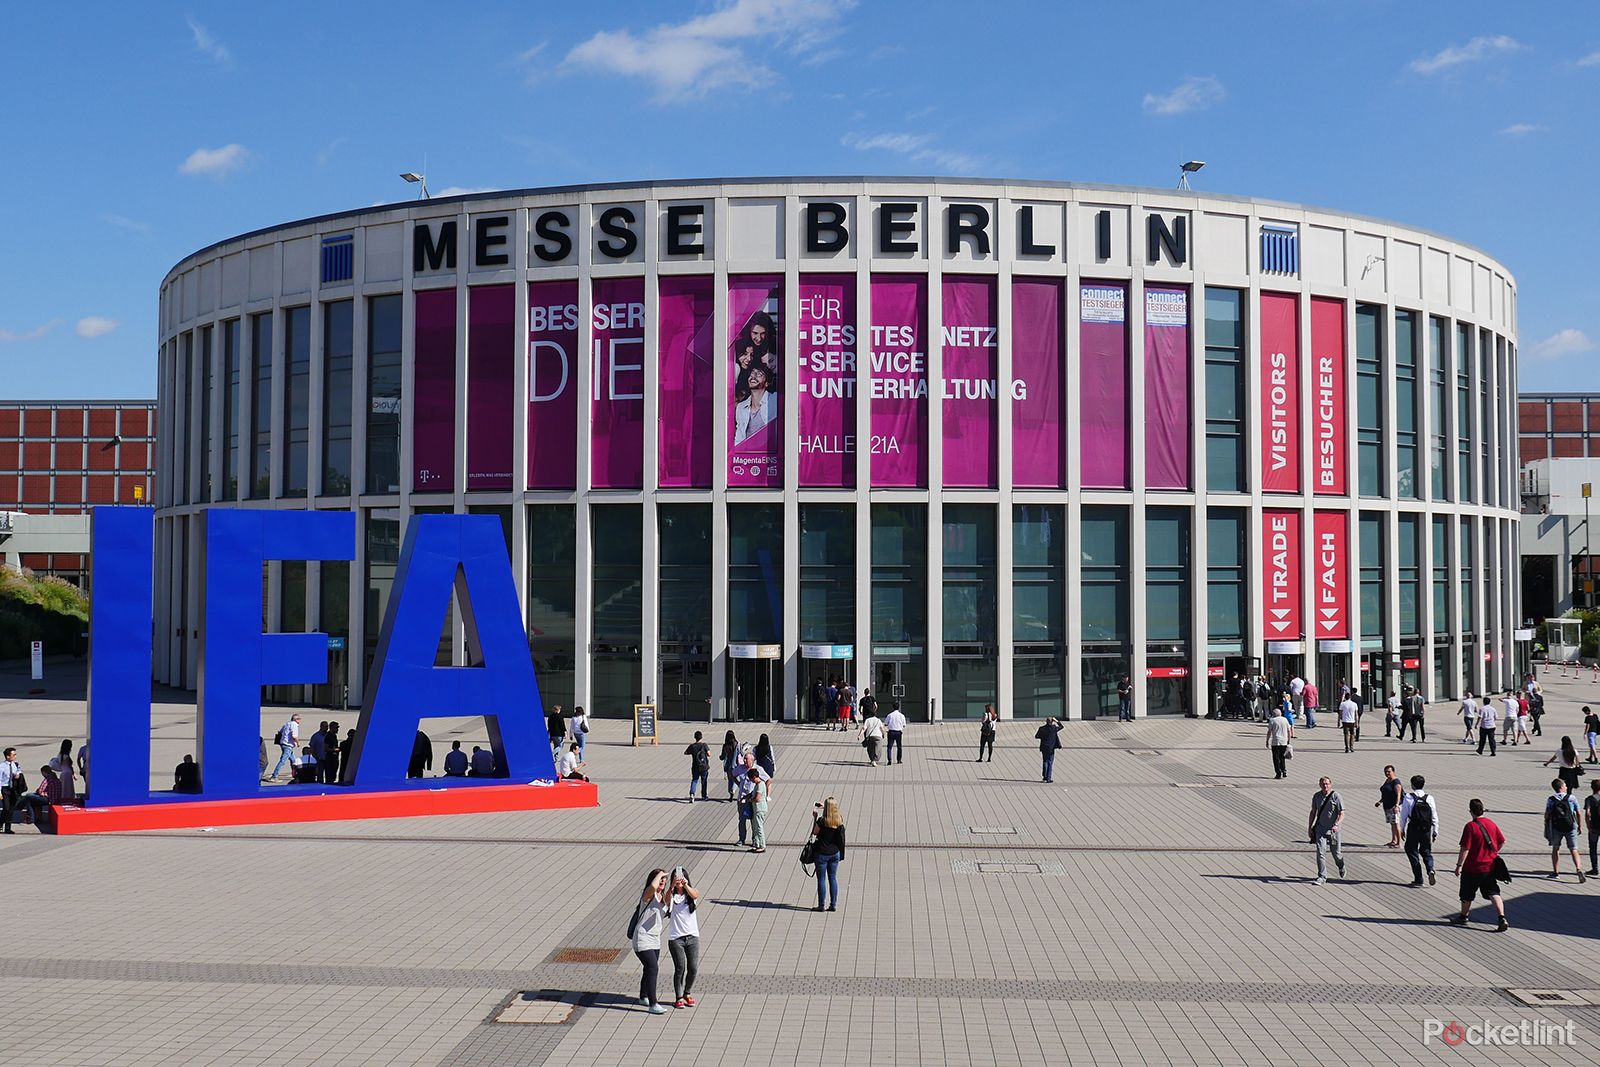 ifa 2020 what s happening to europe s biggest tech expo this year image 1